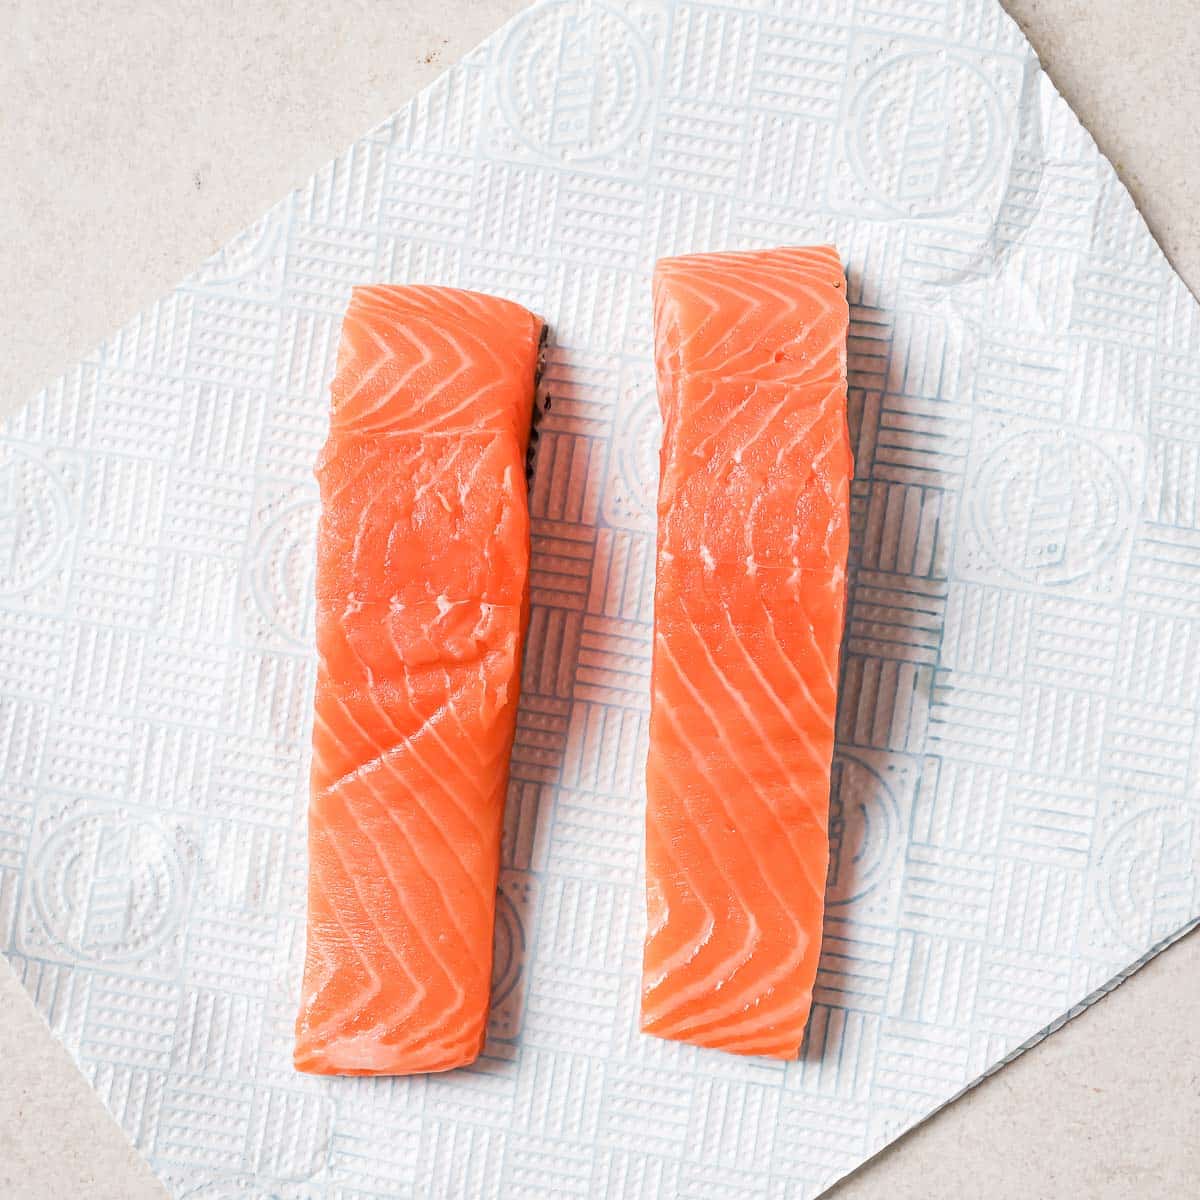 Two pieces of salmon on a piece of paper.